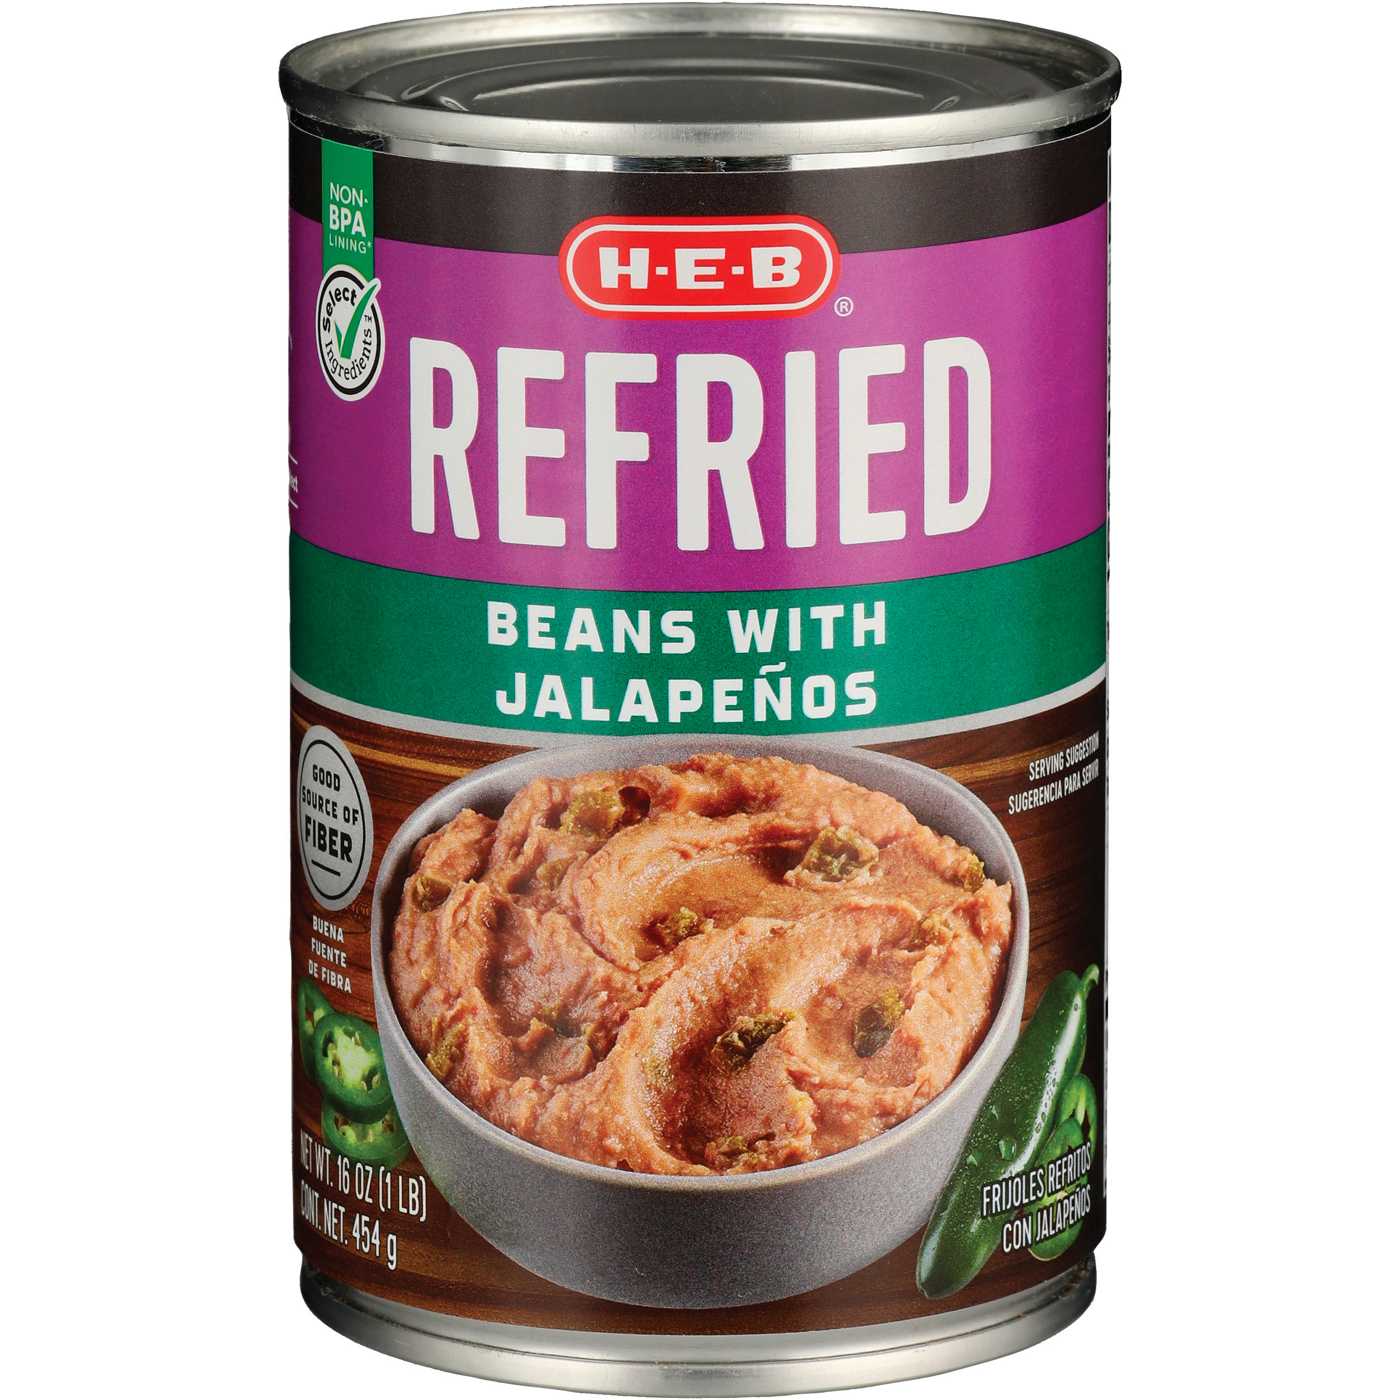 H-E-B Refried Beans with Jalapenos; image 2 of 2